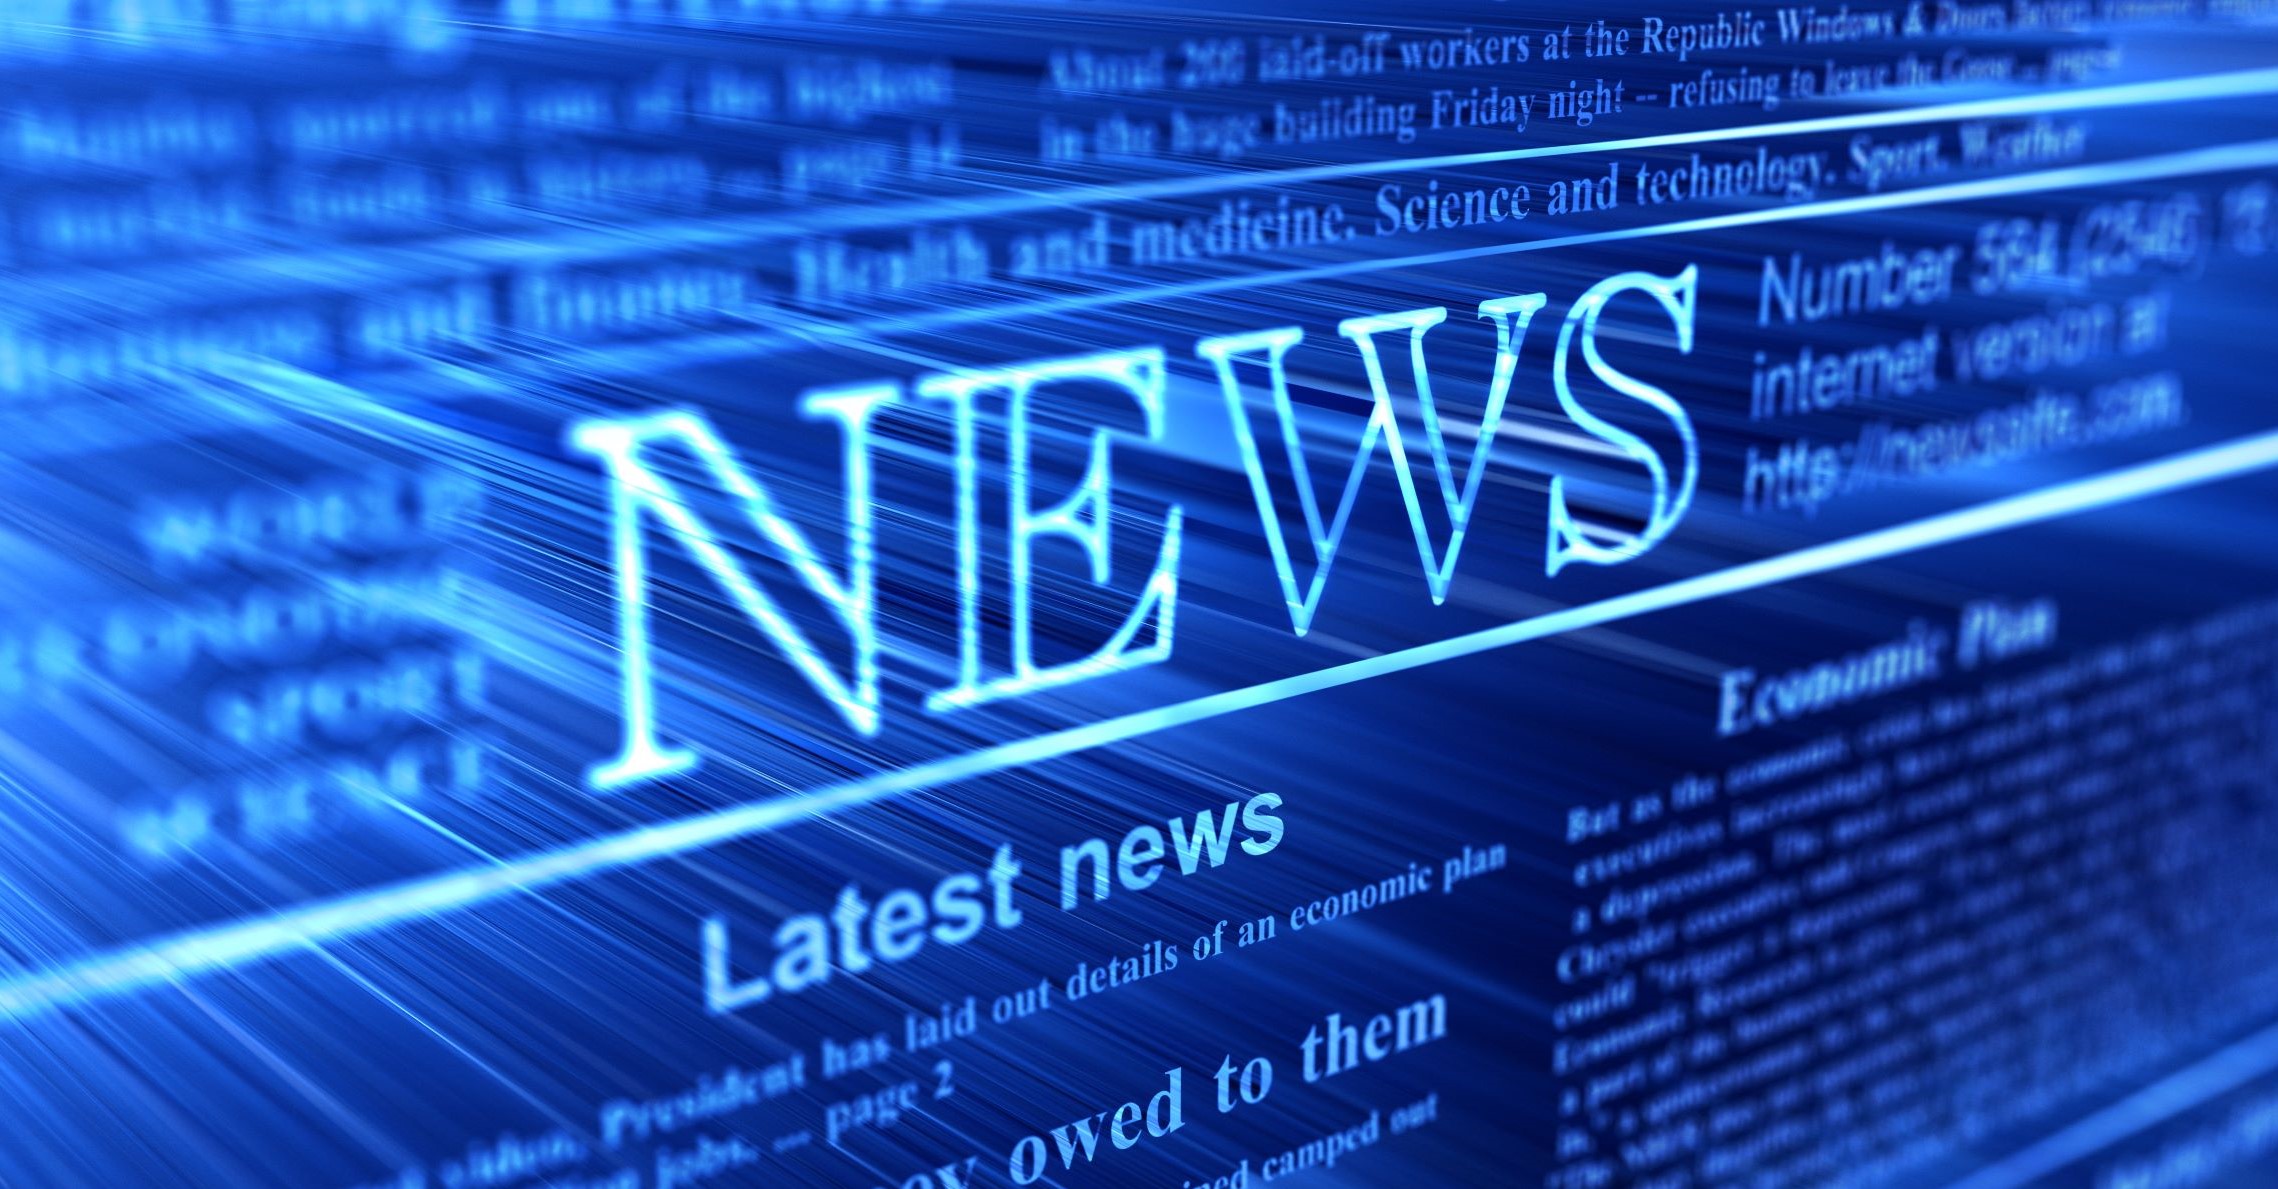 An illustration of blue background with typeset words and the headline NEWS